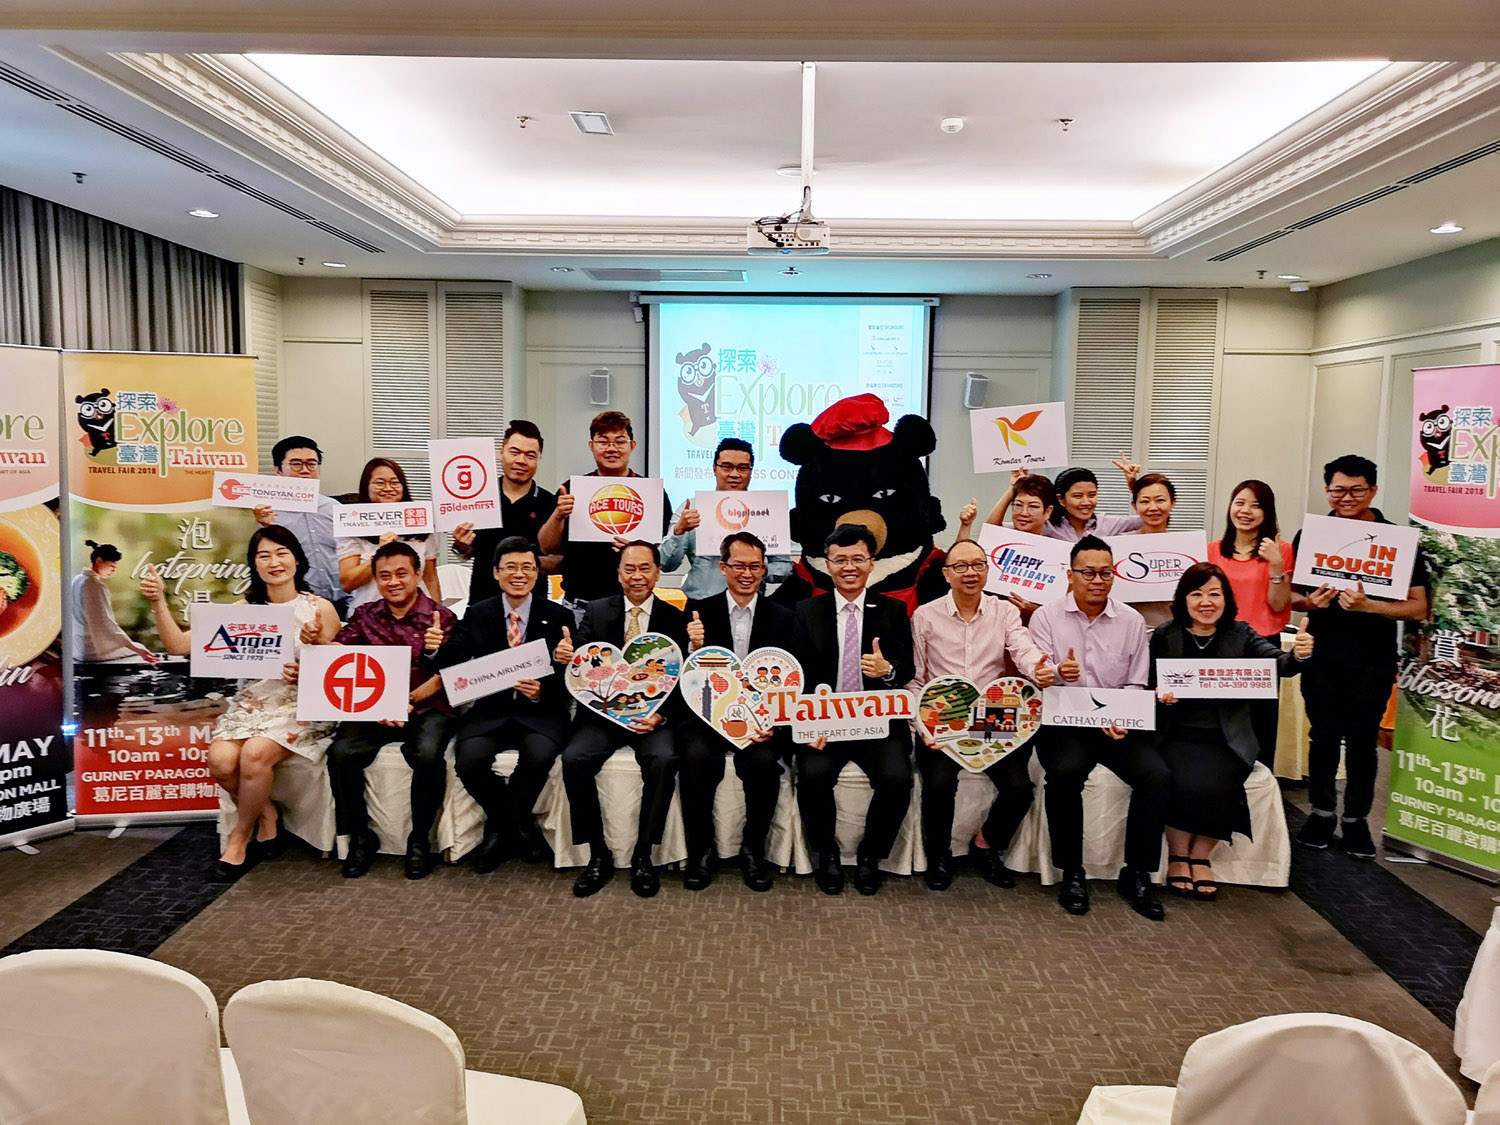 There will be a collaboration of 13 local travel agent partners, together with China Airlines, Cathay Dragon and Genting Cruise Lines, offering special deals for airfare, Taiwan travel and cruises packages. 